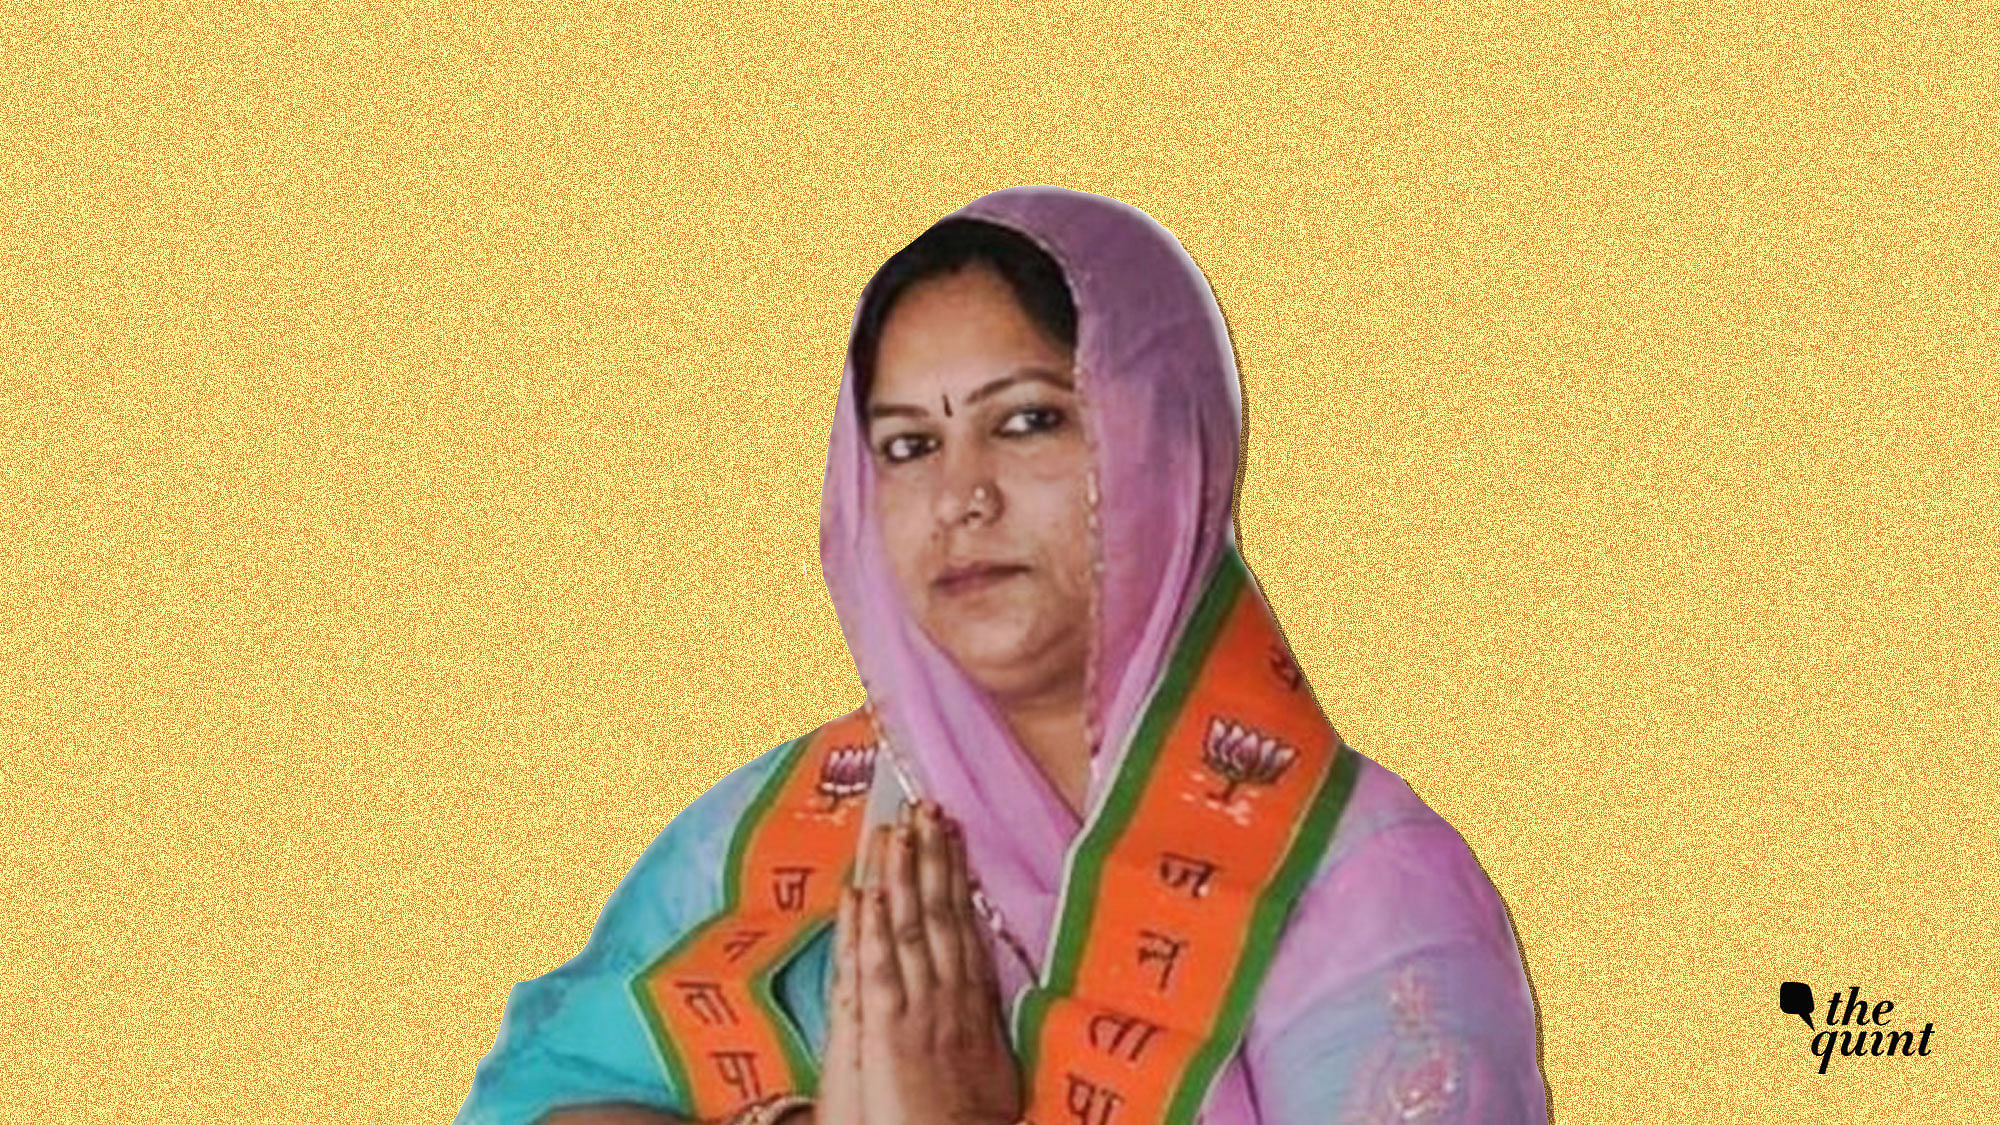 BJP candidate from Rajasthan, Shobha Chauhan.